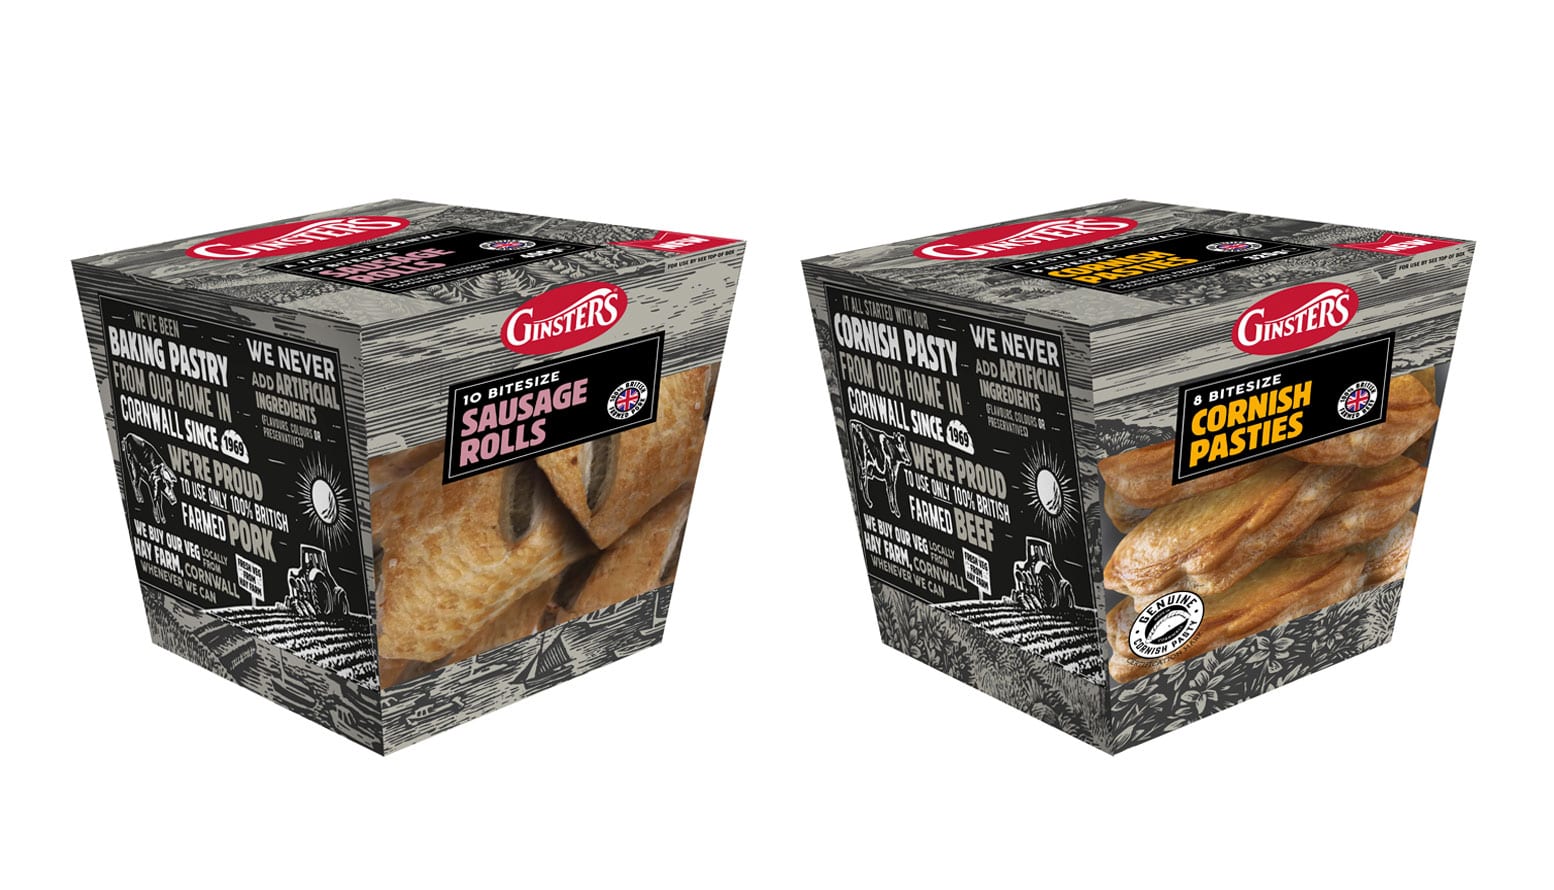 Ginsters Sausage Rolls and Cornish Pasties